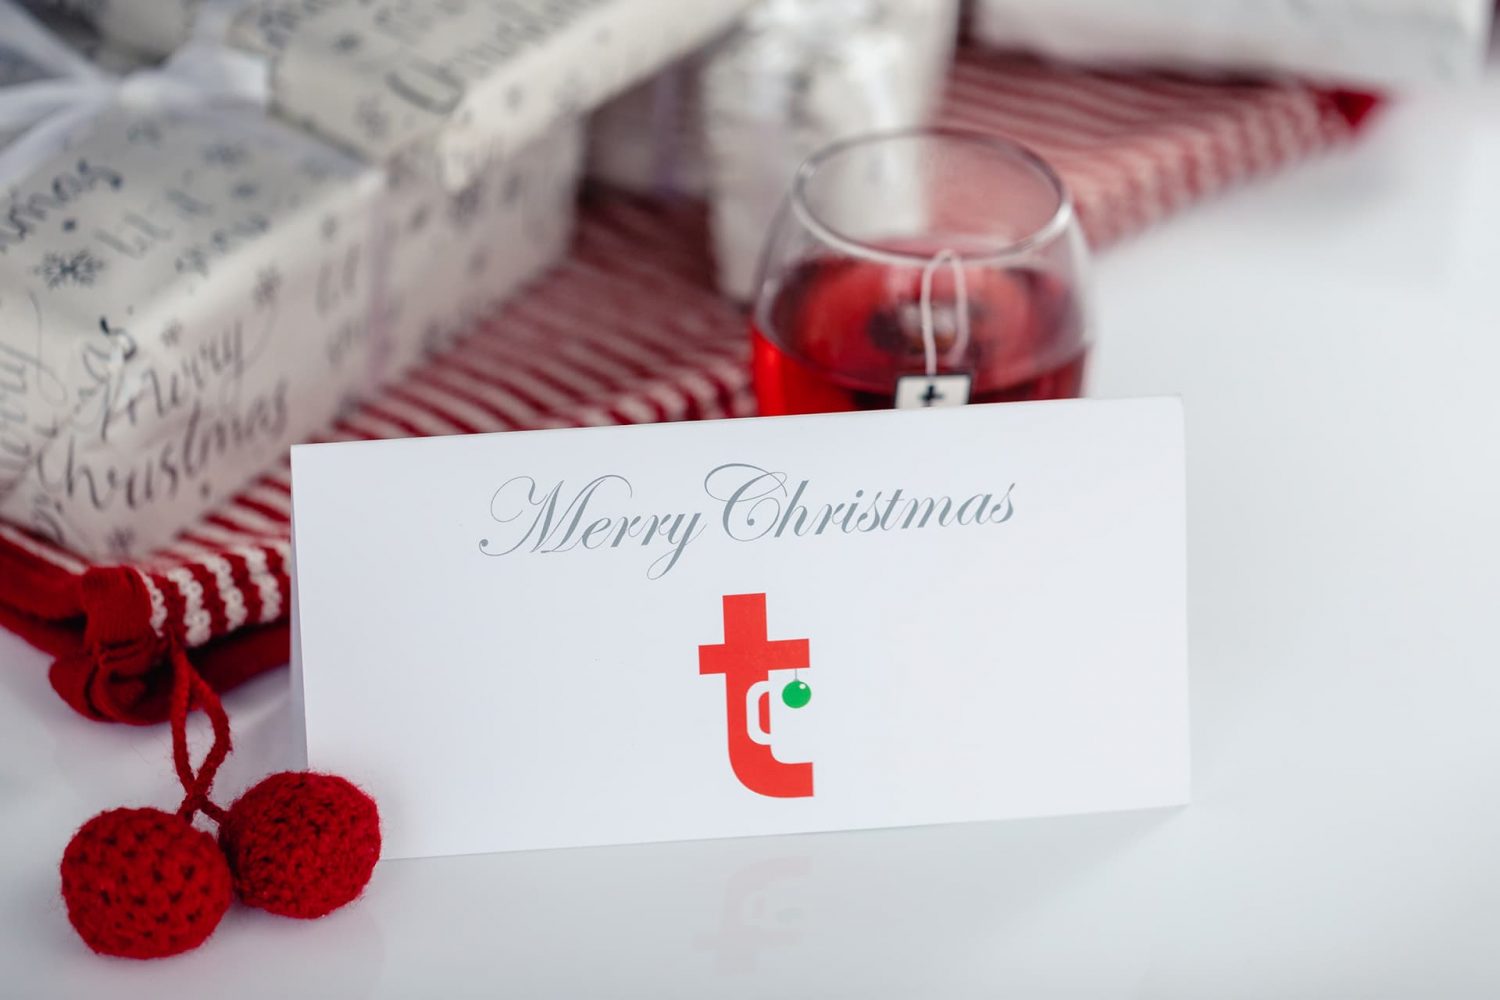 Christmas Card With A Cup Of Tea